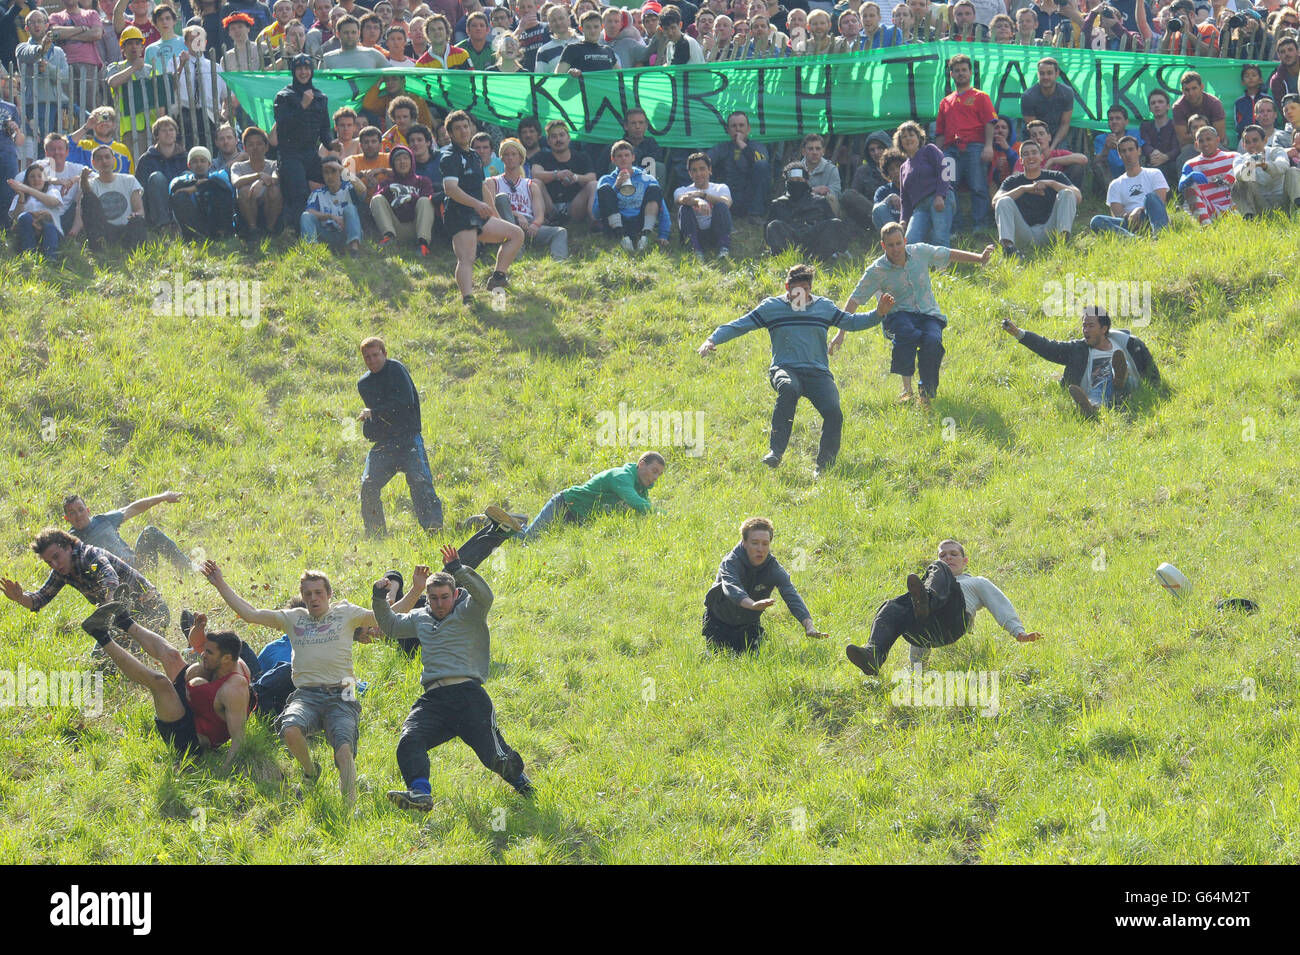 Competitors take part in the annual Cheese Rolling event at Coppers Hill near Brockworth, Gloucestershire. Stock Photo